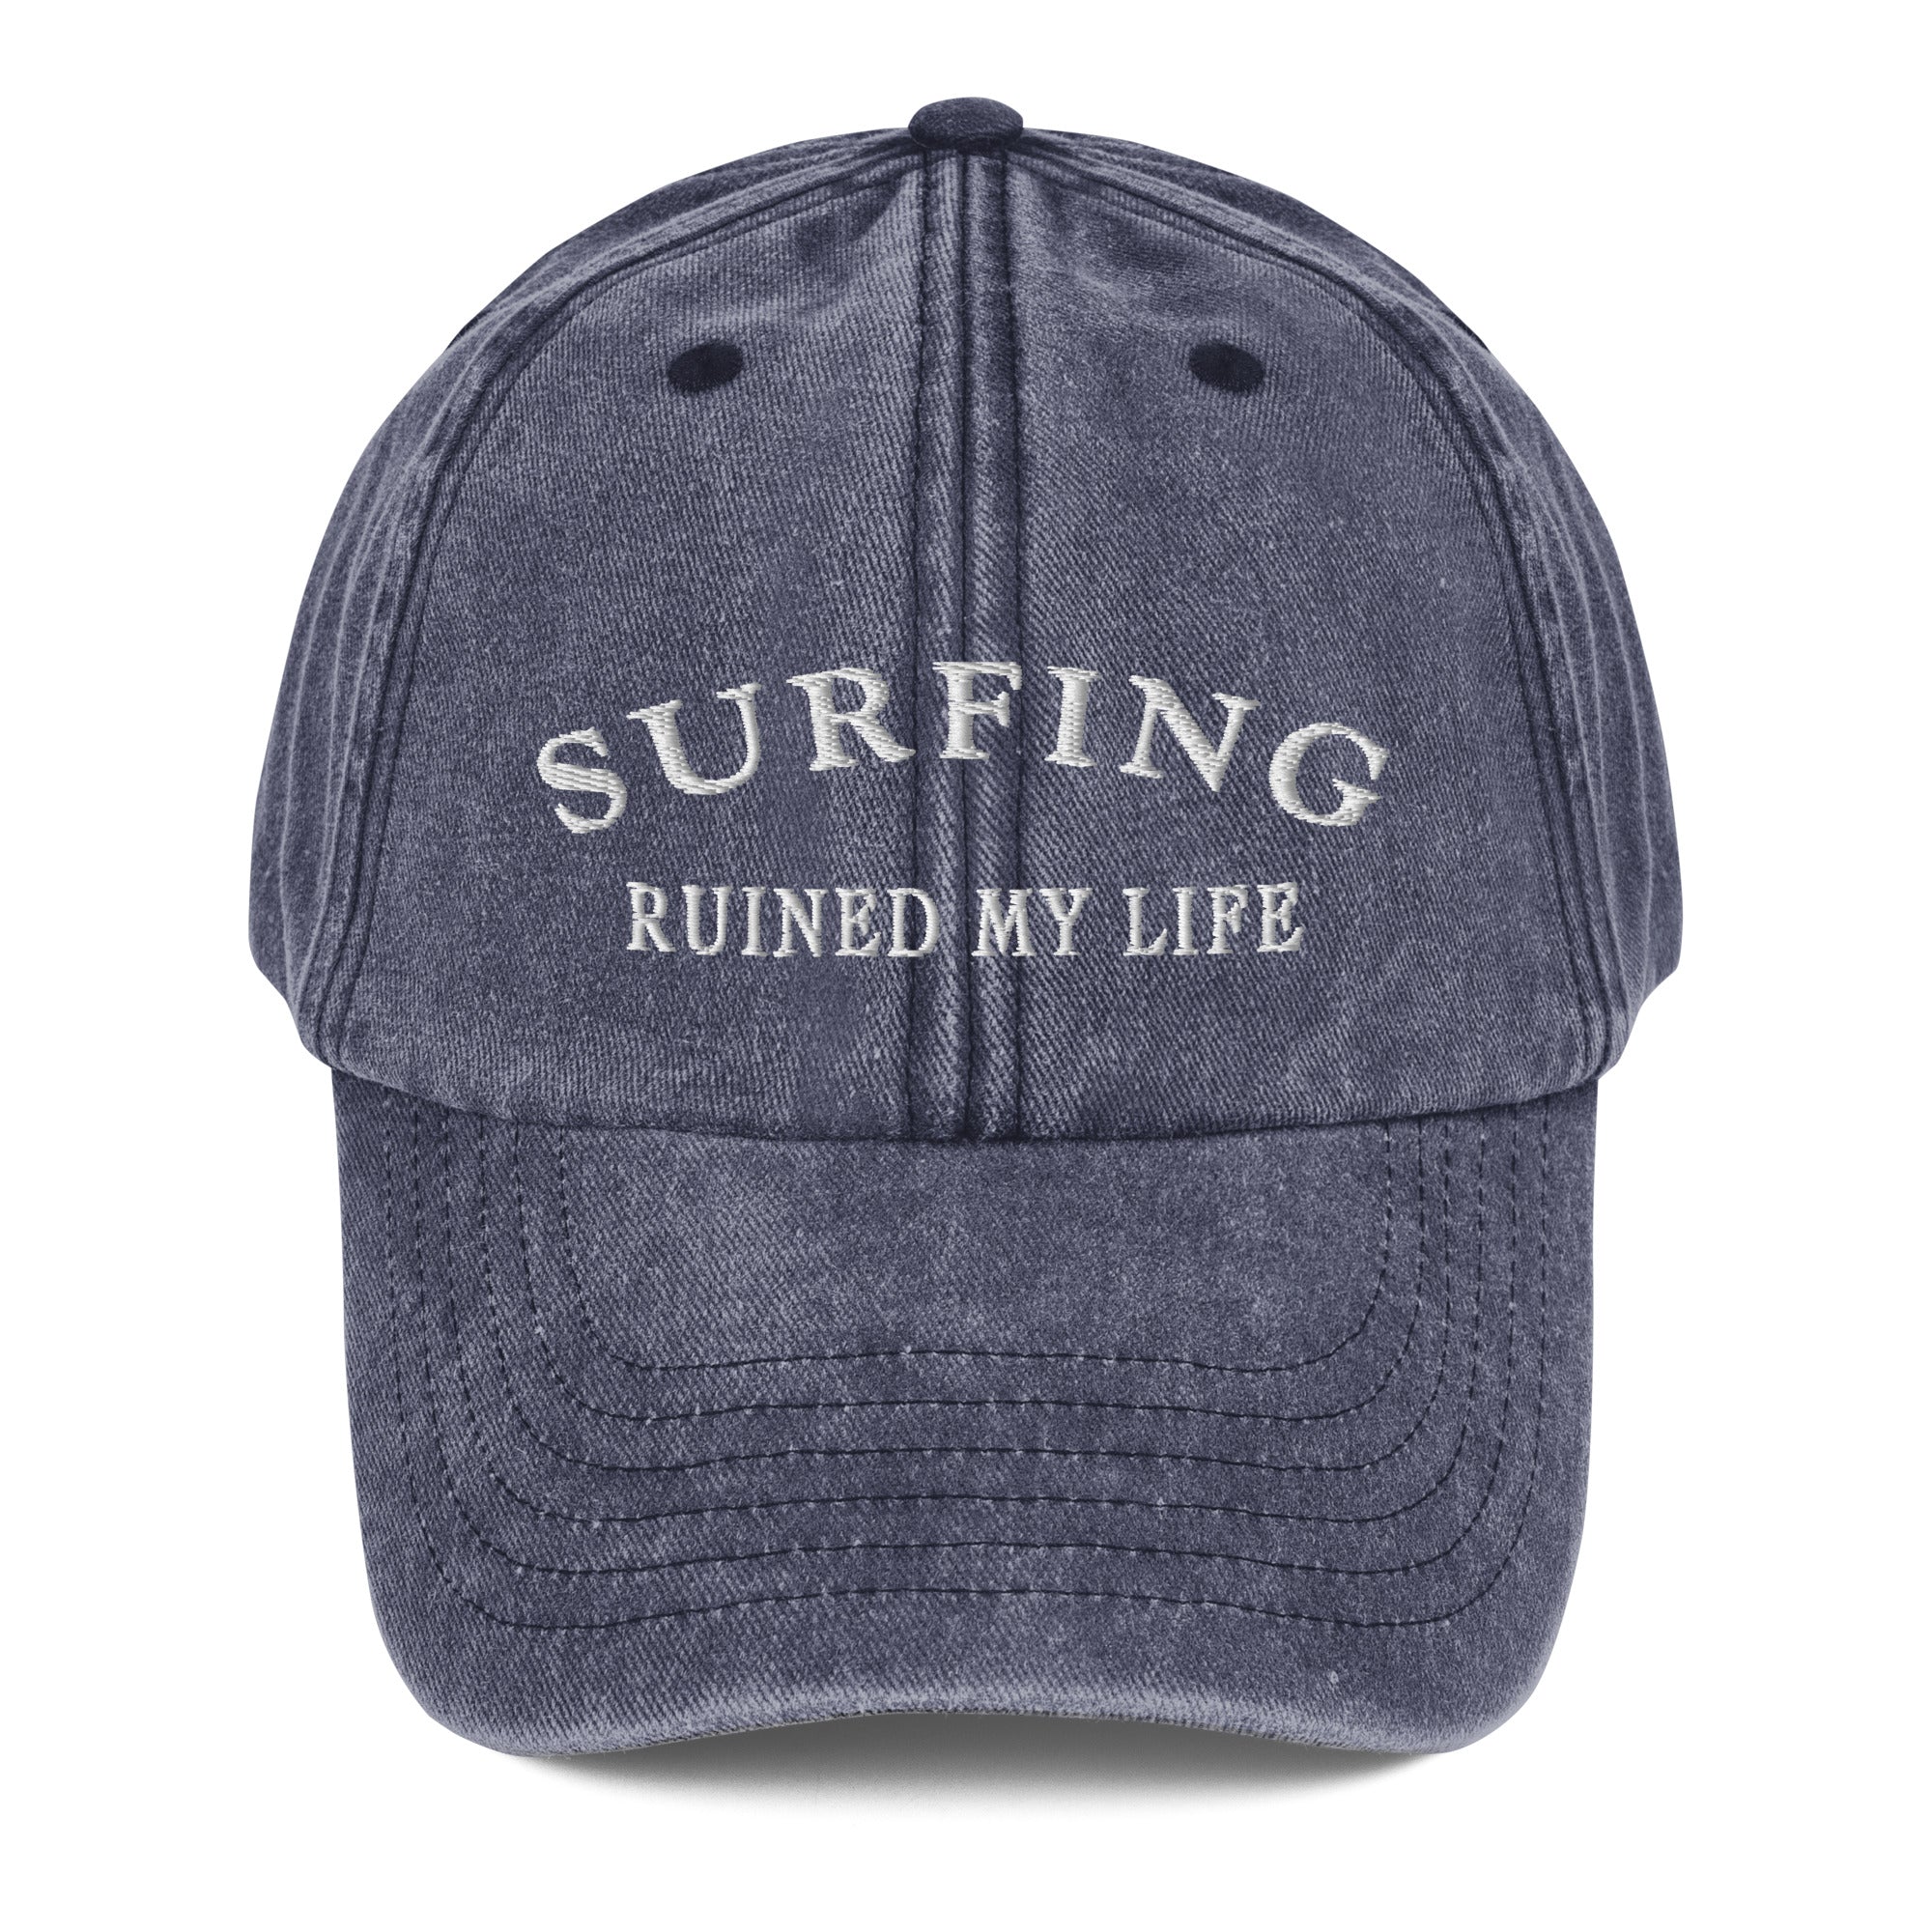 Surfing Ruined My Life {Gorra vintage}